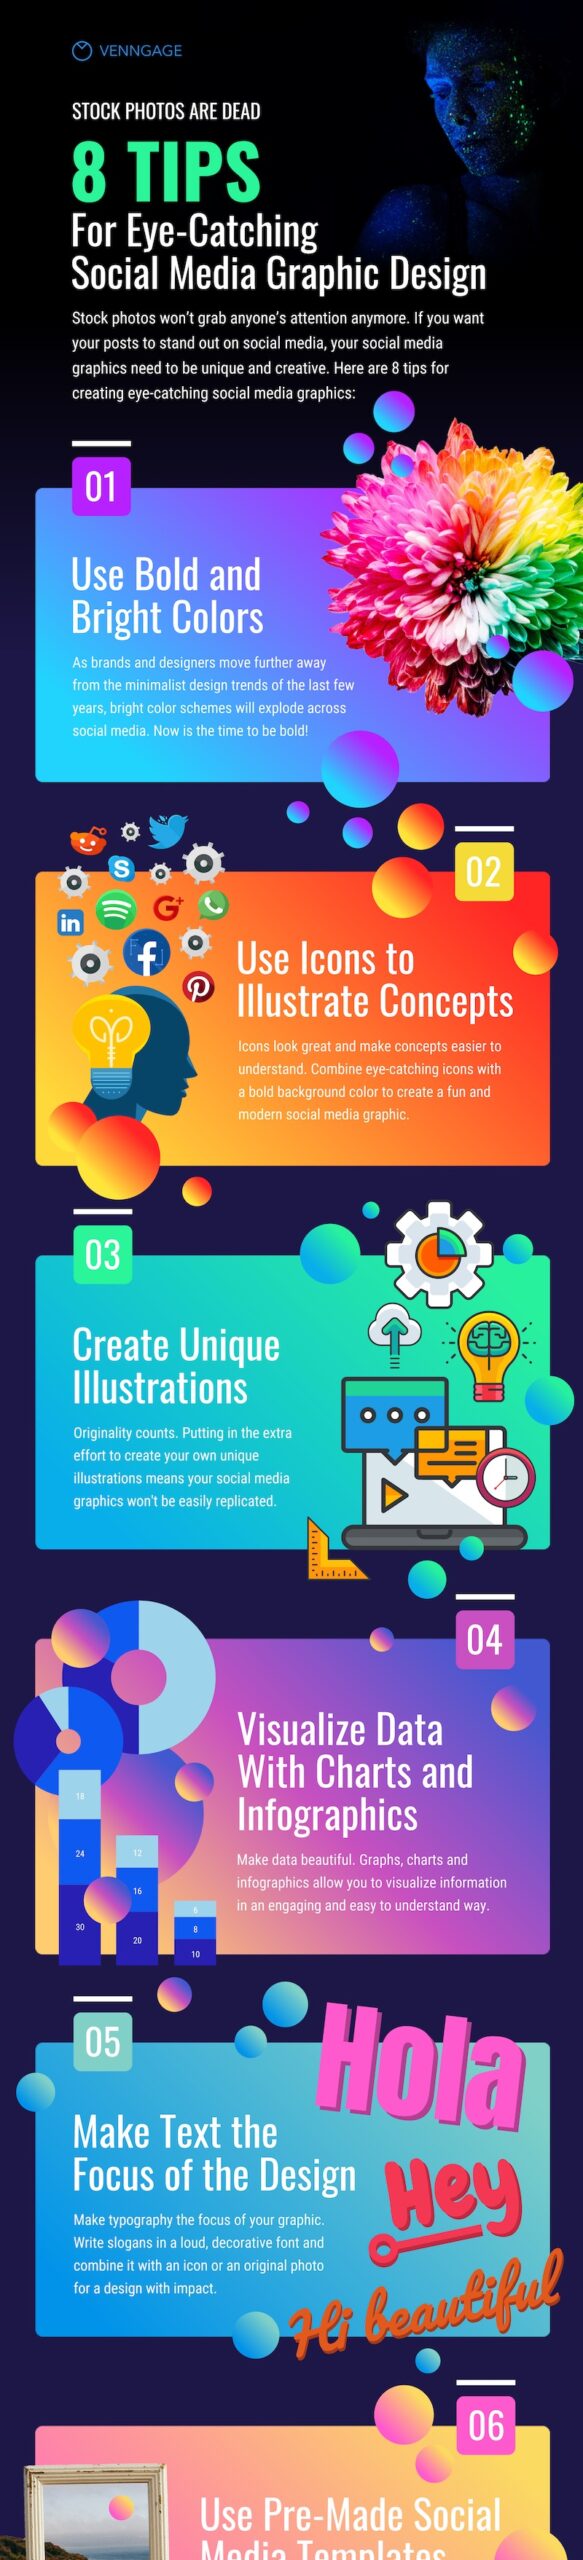 40 Infographic Ideas to Jumpstart your Creativity | Visual Learning Center by Visme